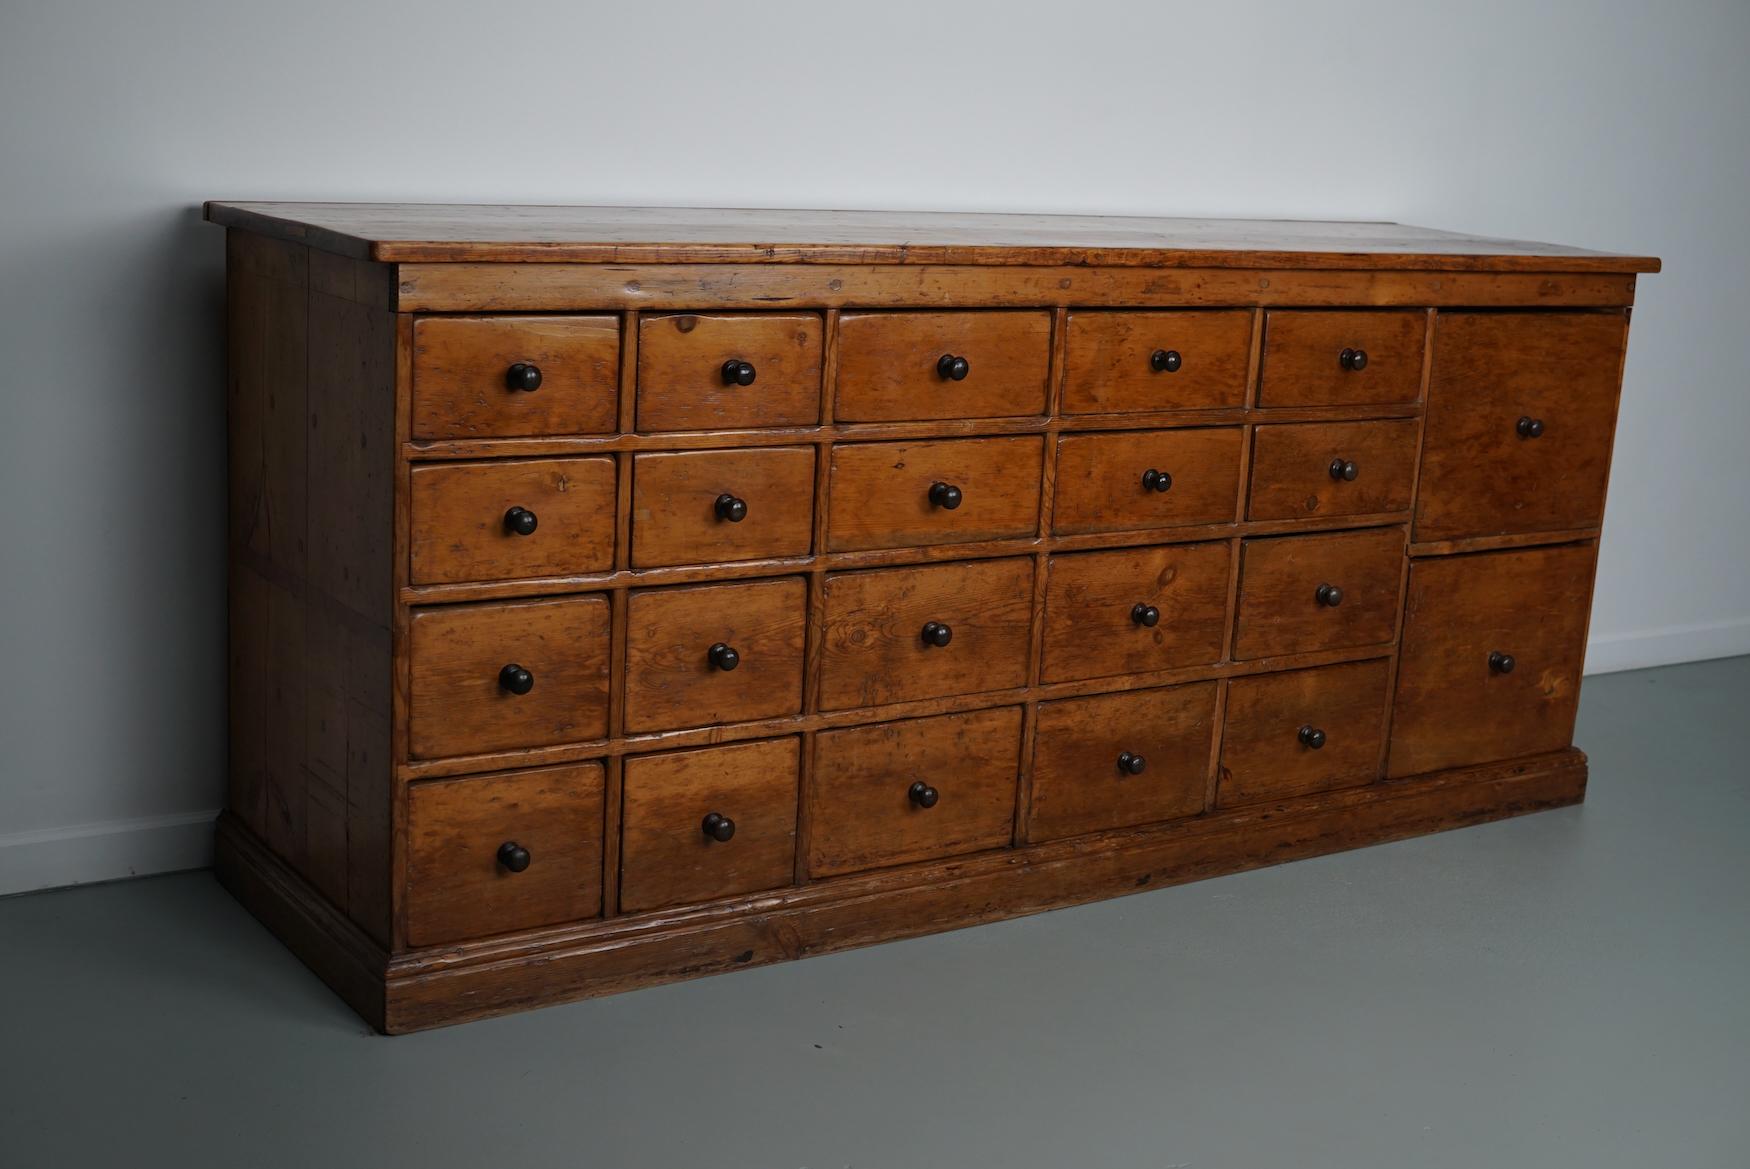 British Antique English Pine Apothecary Cabinet / Bank of Drawers, 1890s